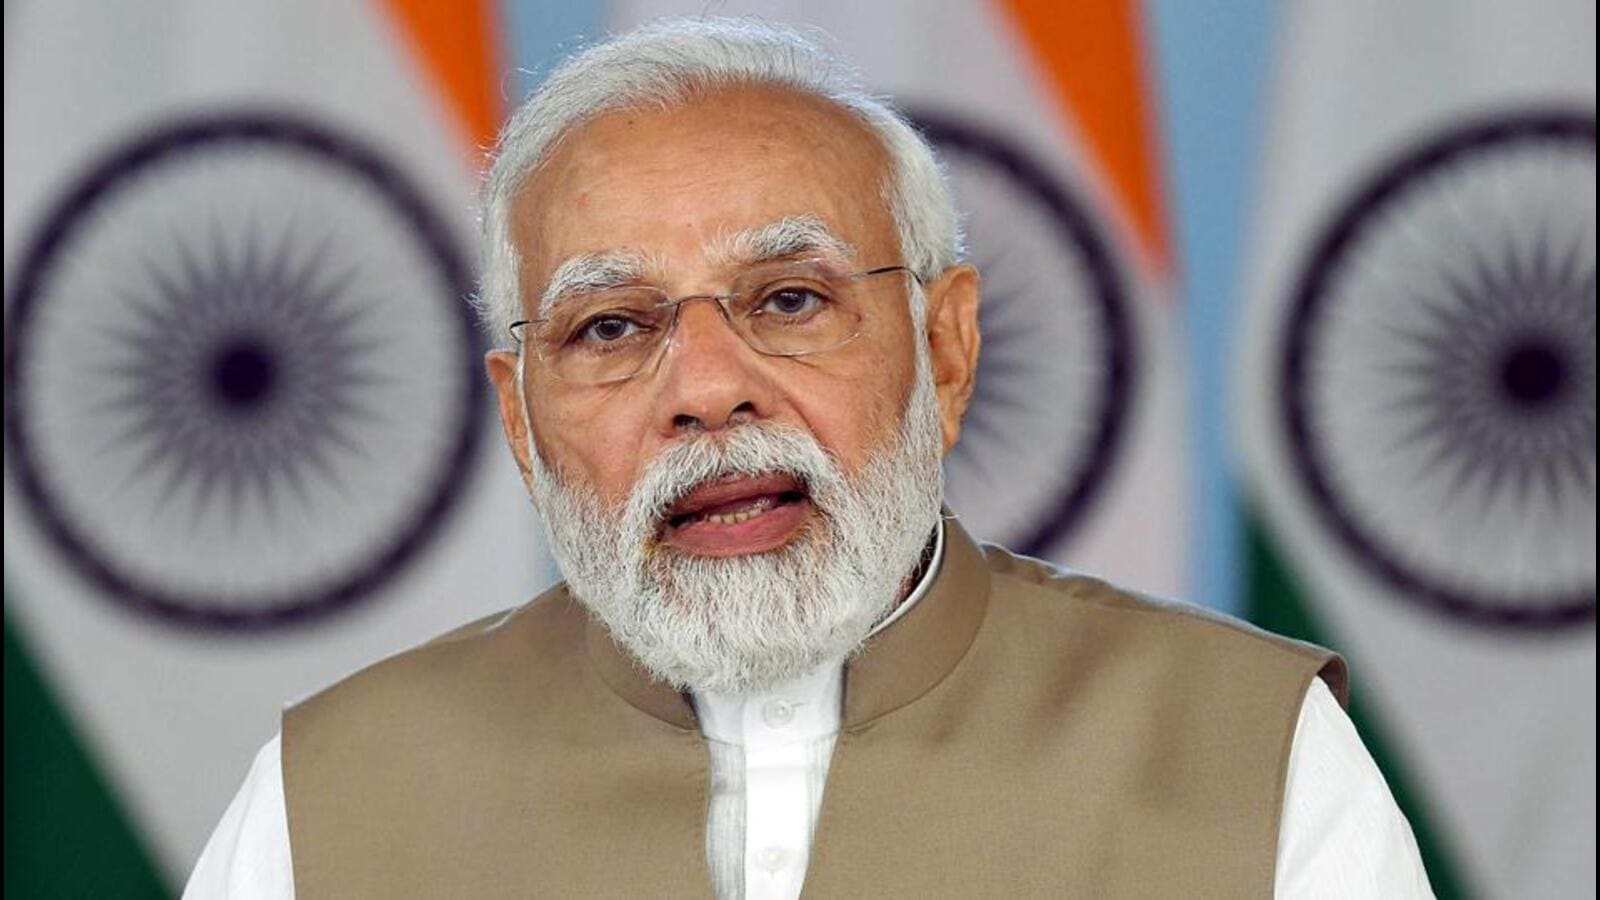 India aims for 50% installed energy capacity through non-fossil fuel by 2030: PM